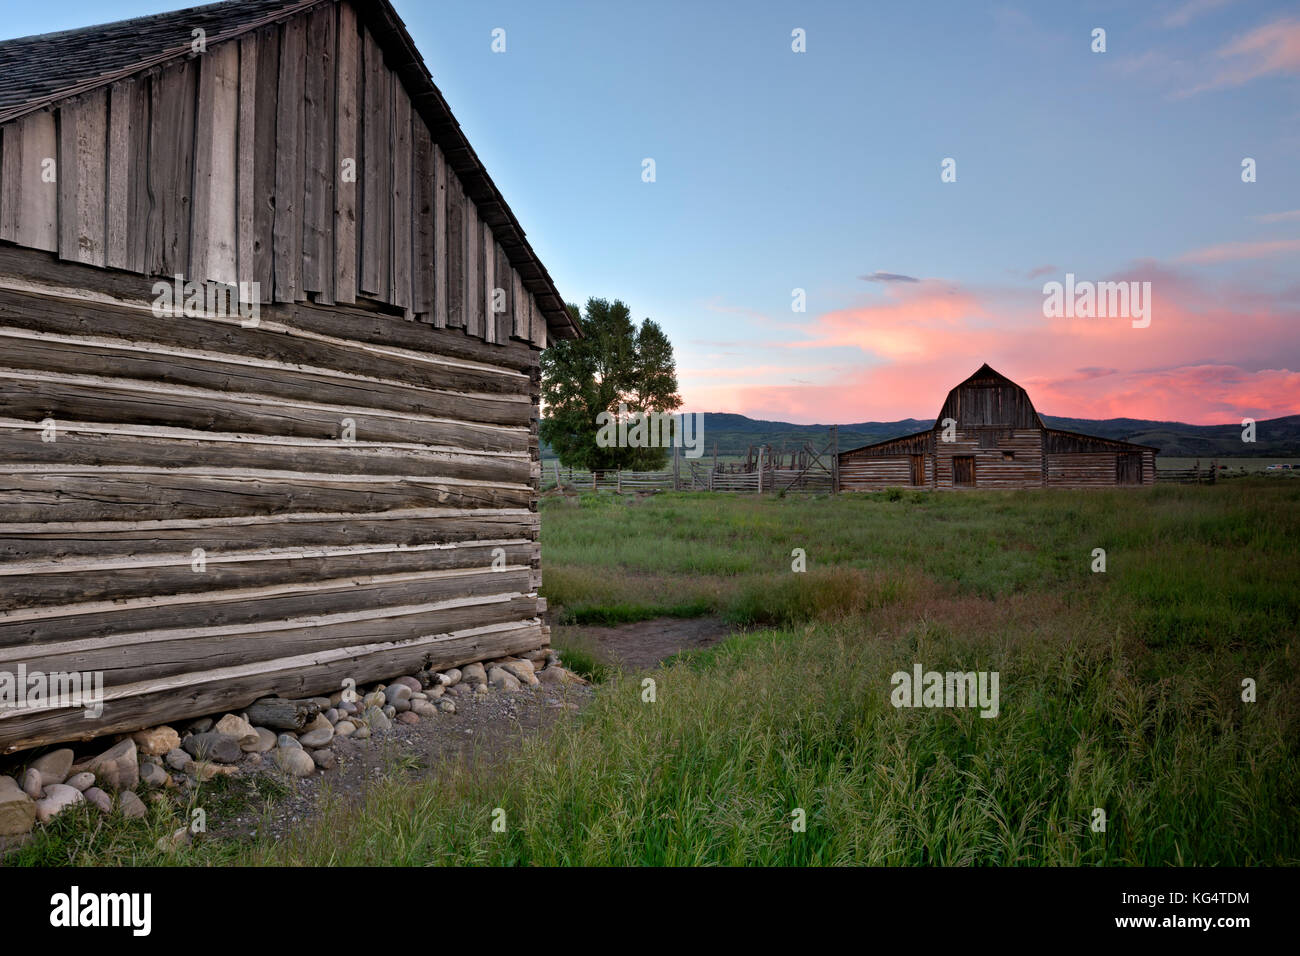 WY02542-00...WYOMING - Sunset over an old log structures at a homestead along Mormon Row in Grand Teton National Park. Stock Photo